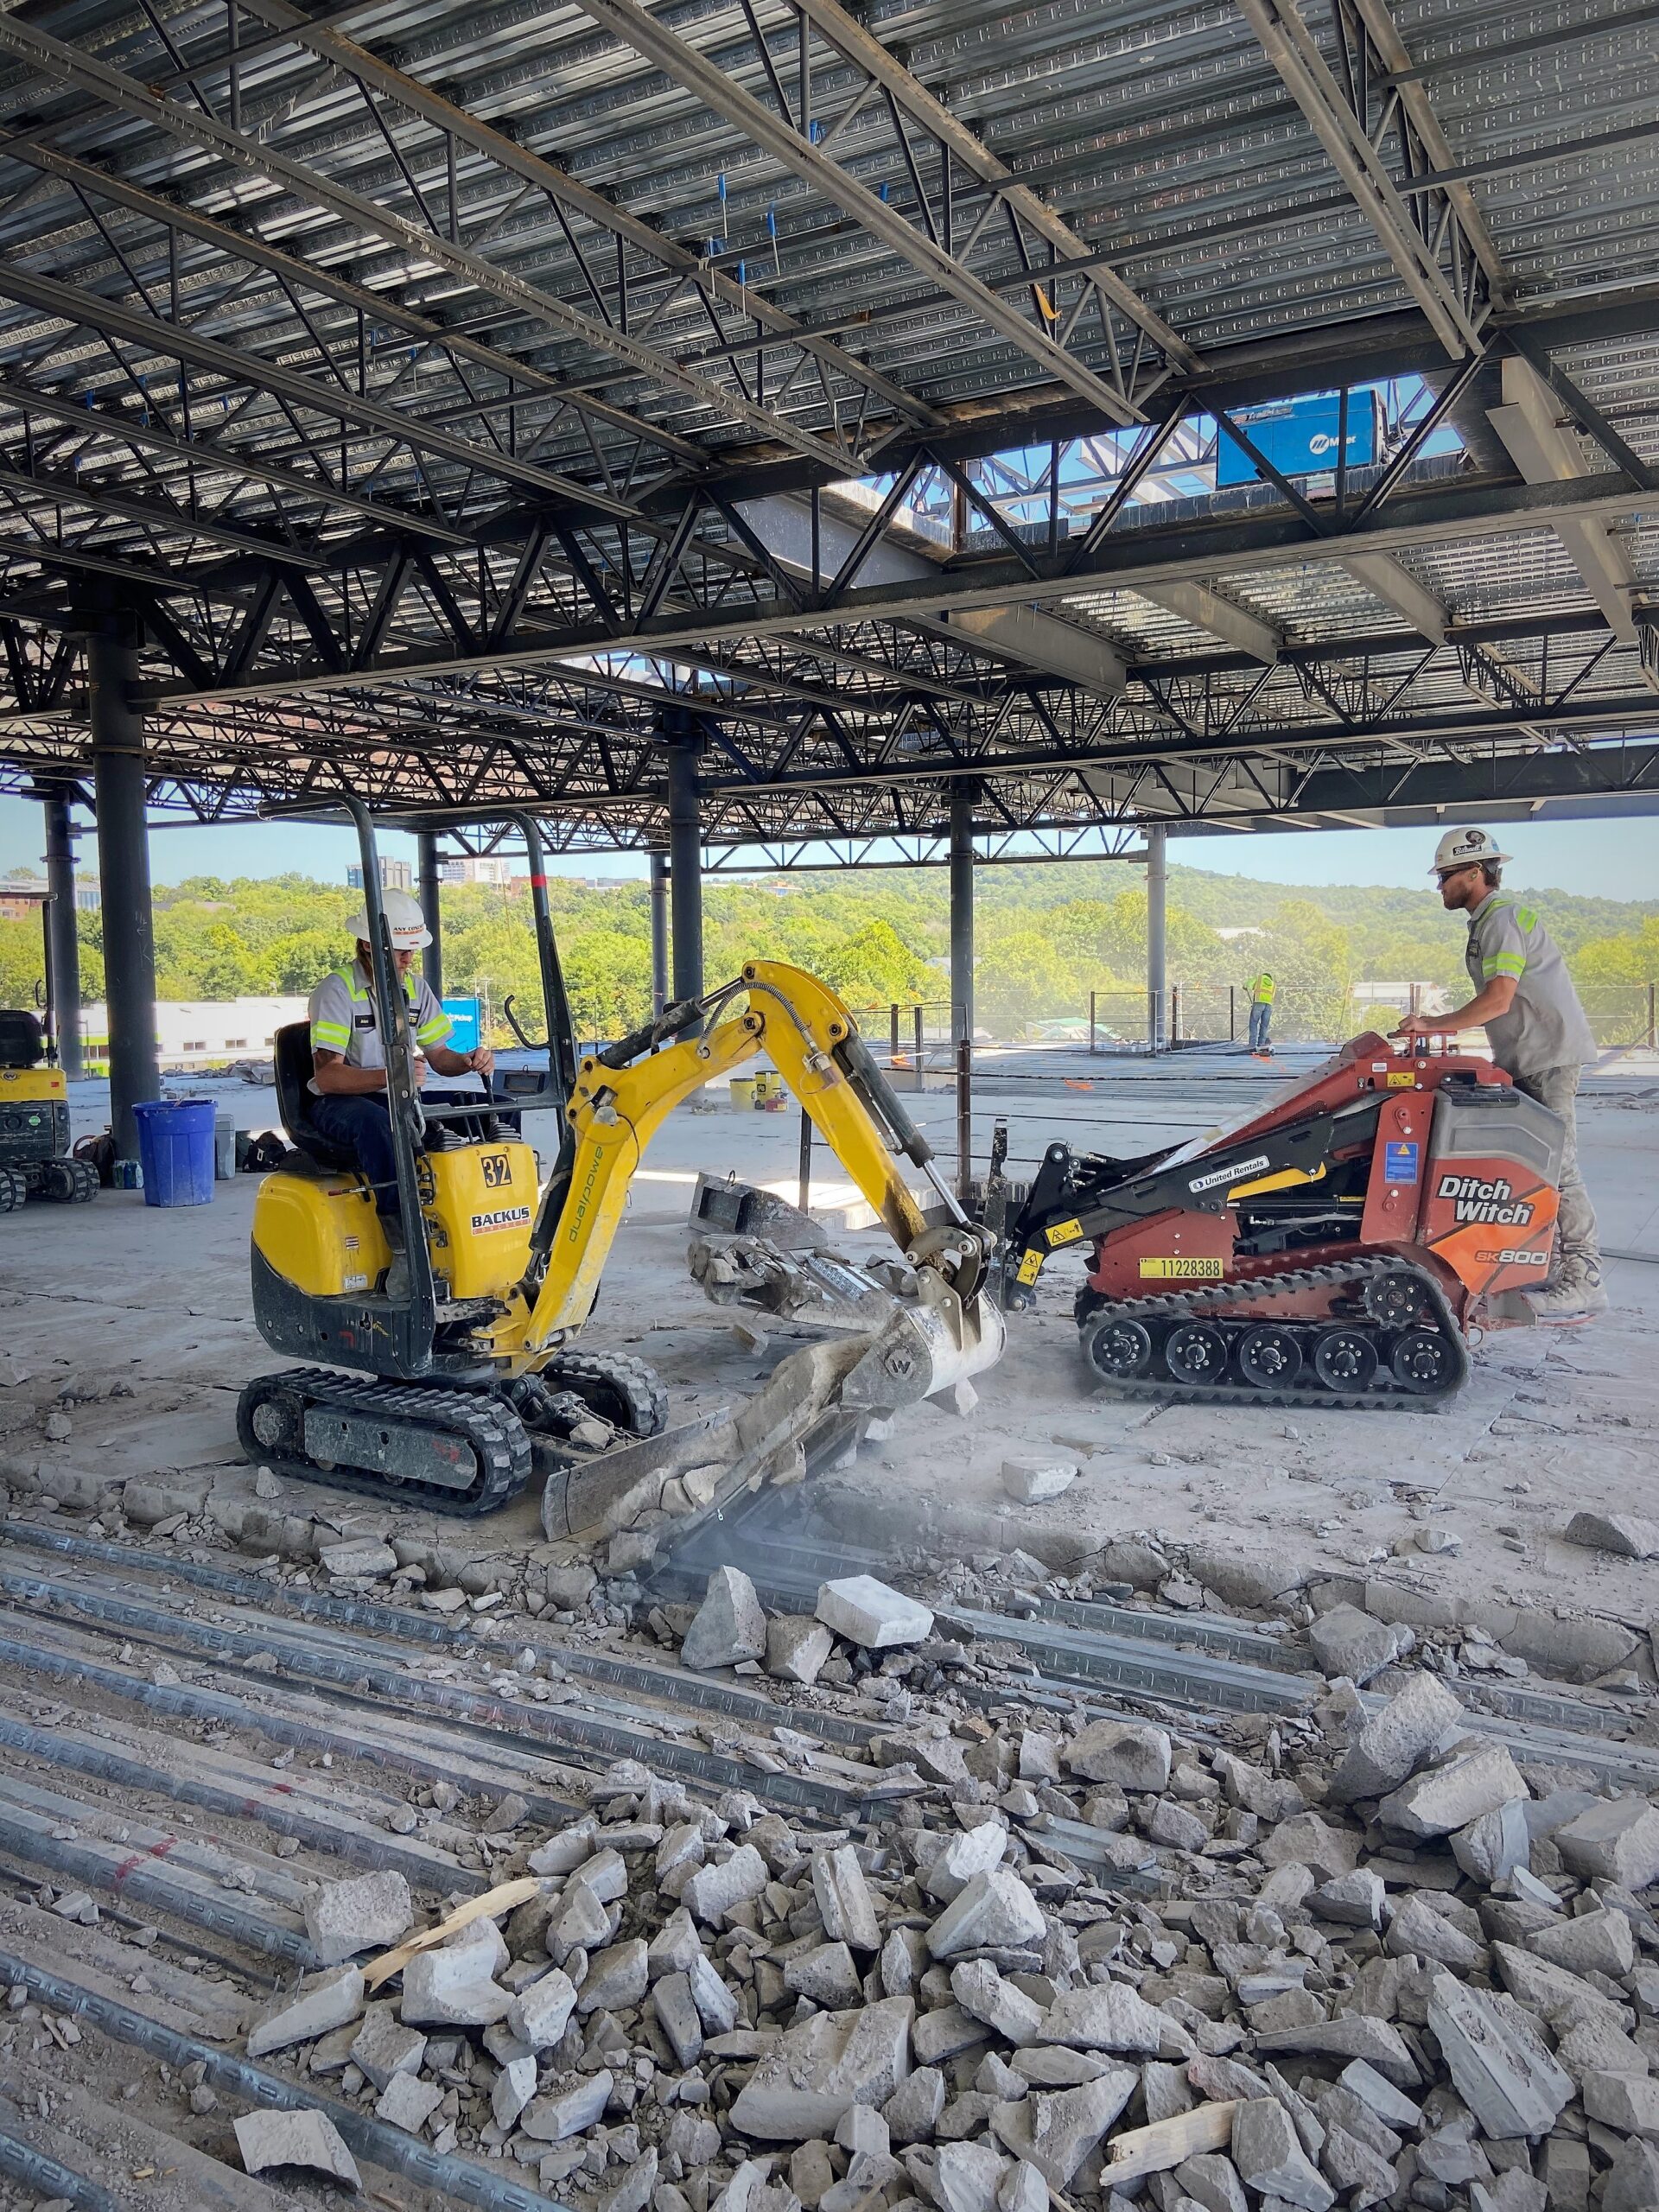 An Any Concrete Cutting contractor on an excavator doing concrete demolition work underneath a metal awning and the other technician on a skid steer